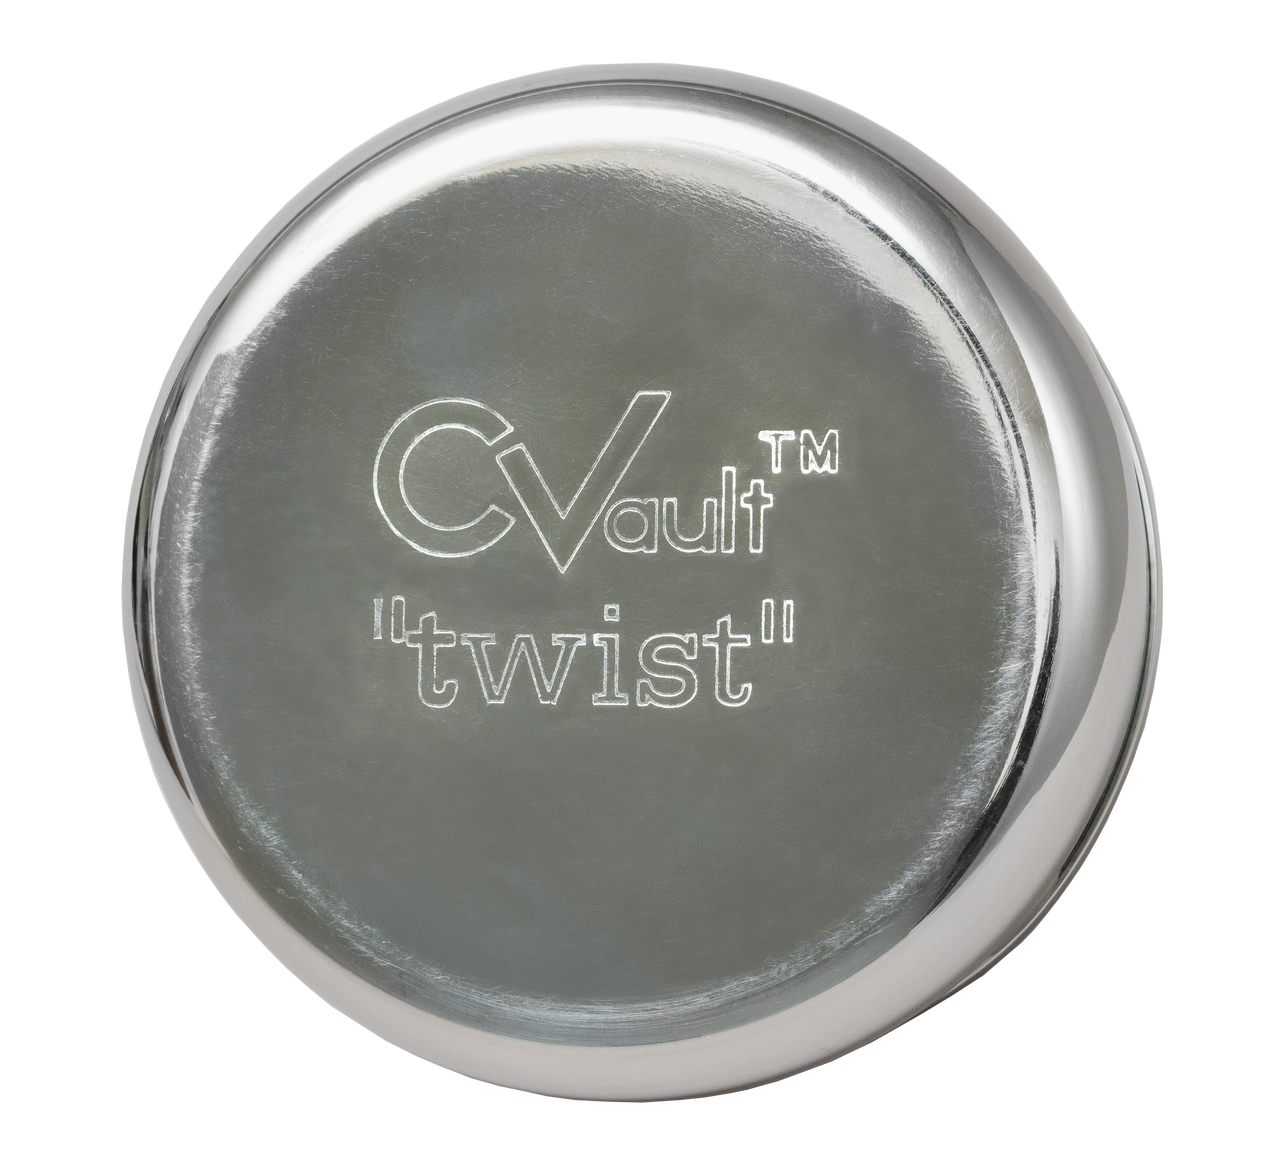 CVault - Small 1/2 OZ. Airtight Stainless Steel Storage Container bottom.